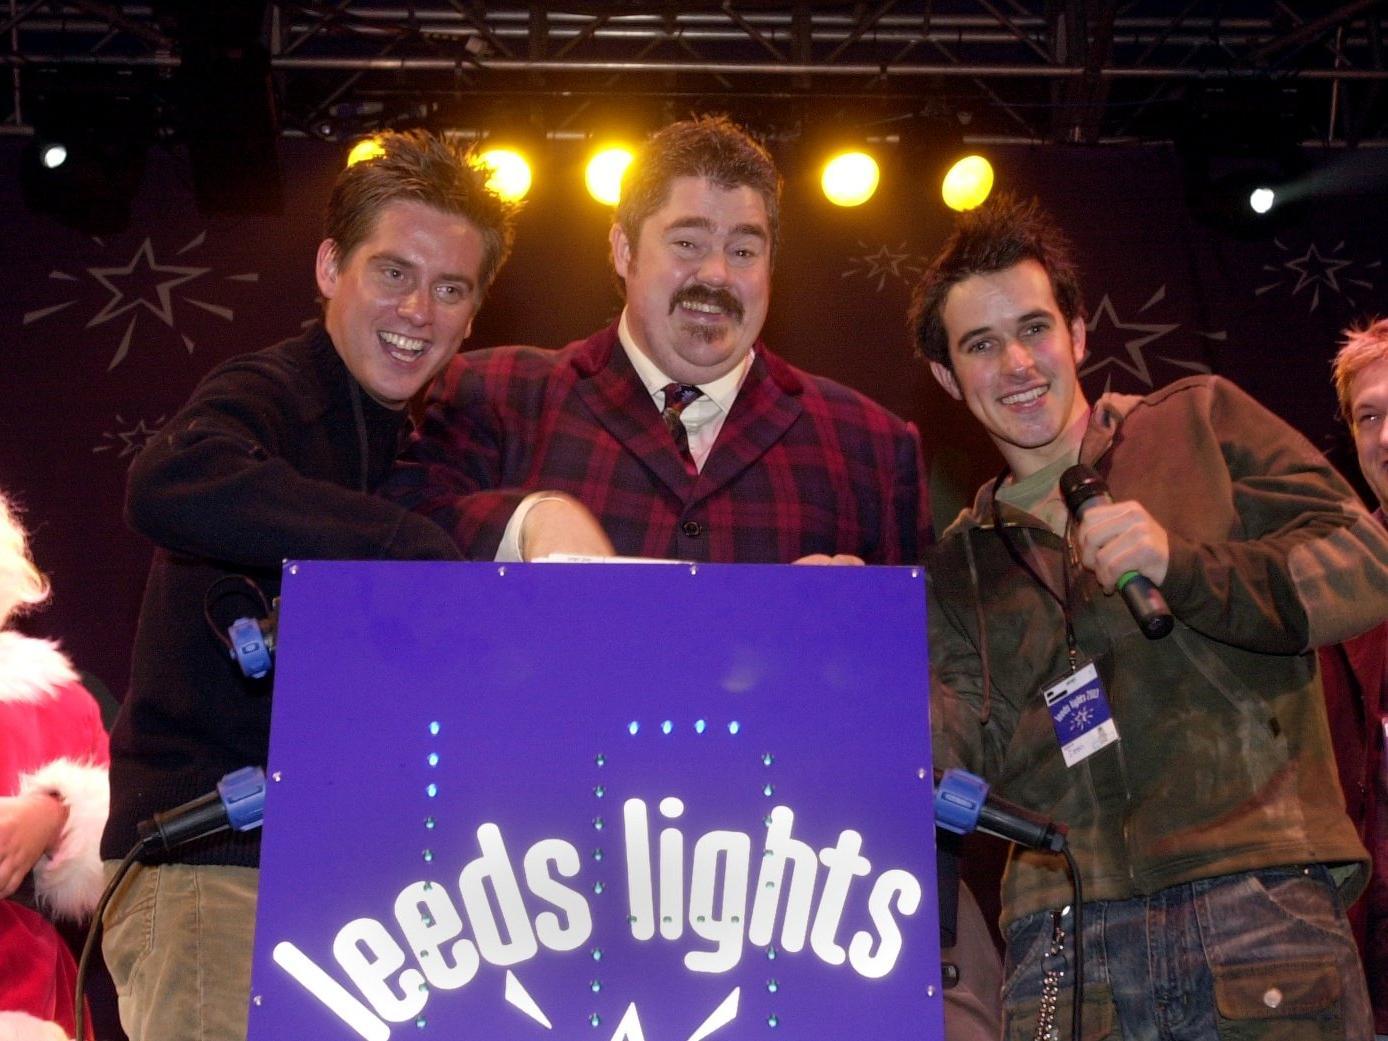 Leeds City Council announced that years Leeds lights would be turned on by Phill Jupitus and a city replied: Who?